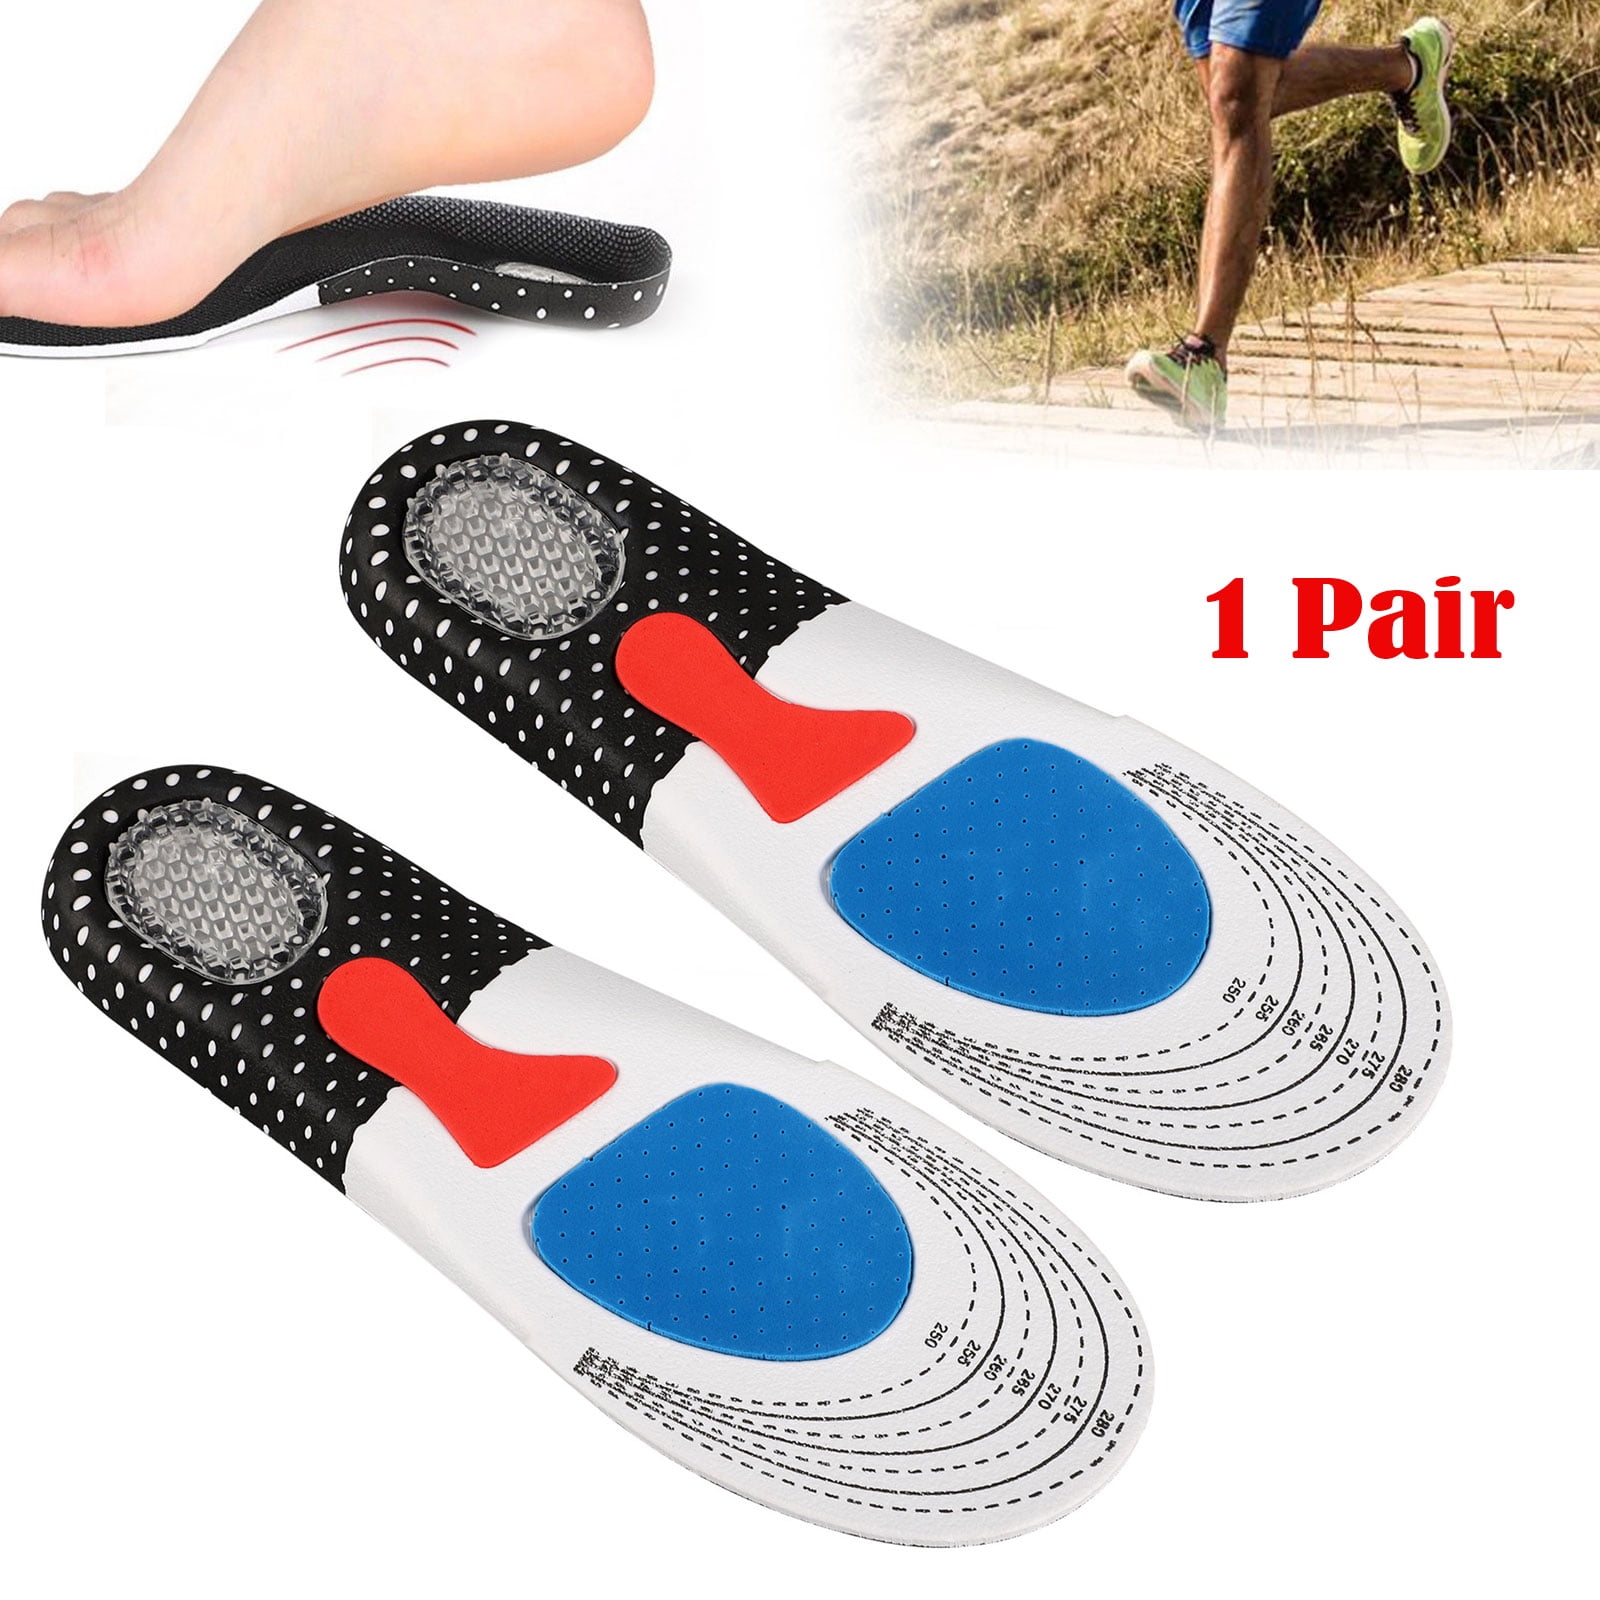 Ortho Central ProSoles Plantar Fasciitis Insoles Anti Fatigue for Walking Runing and Sports 